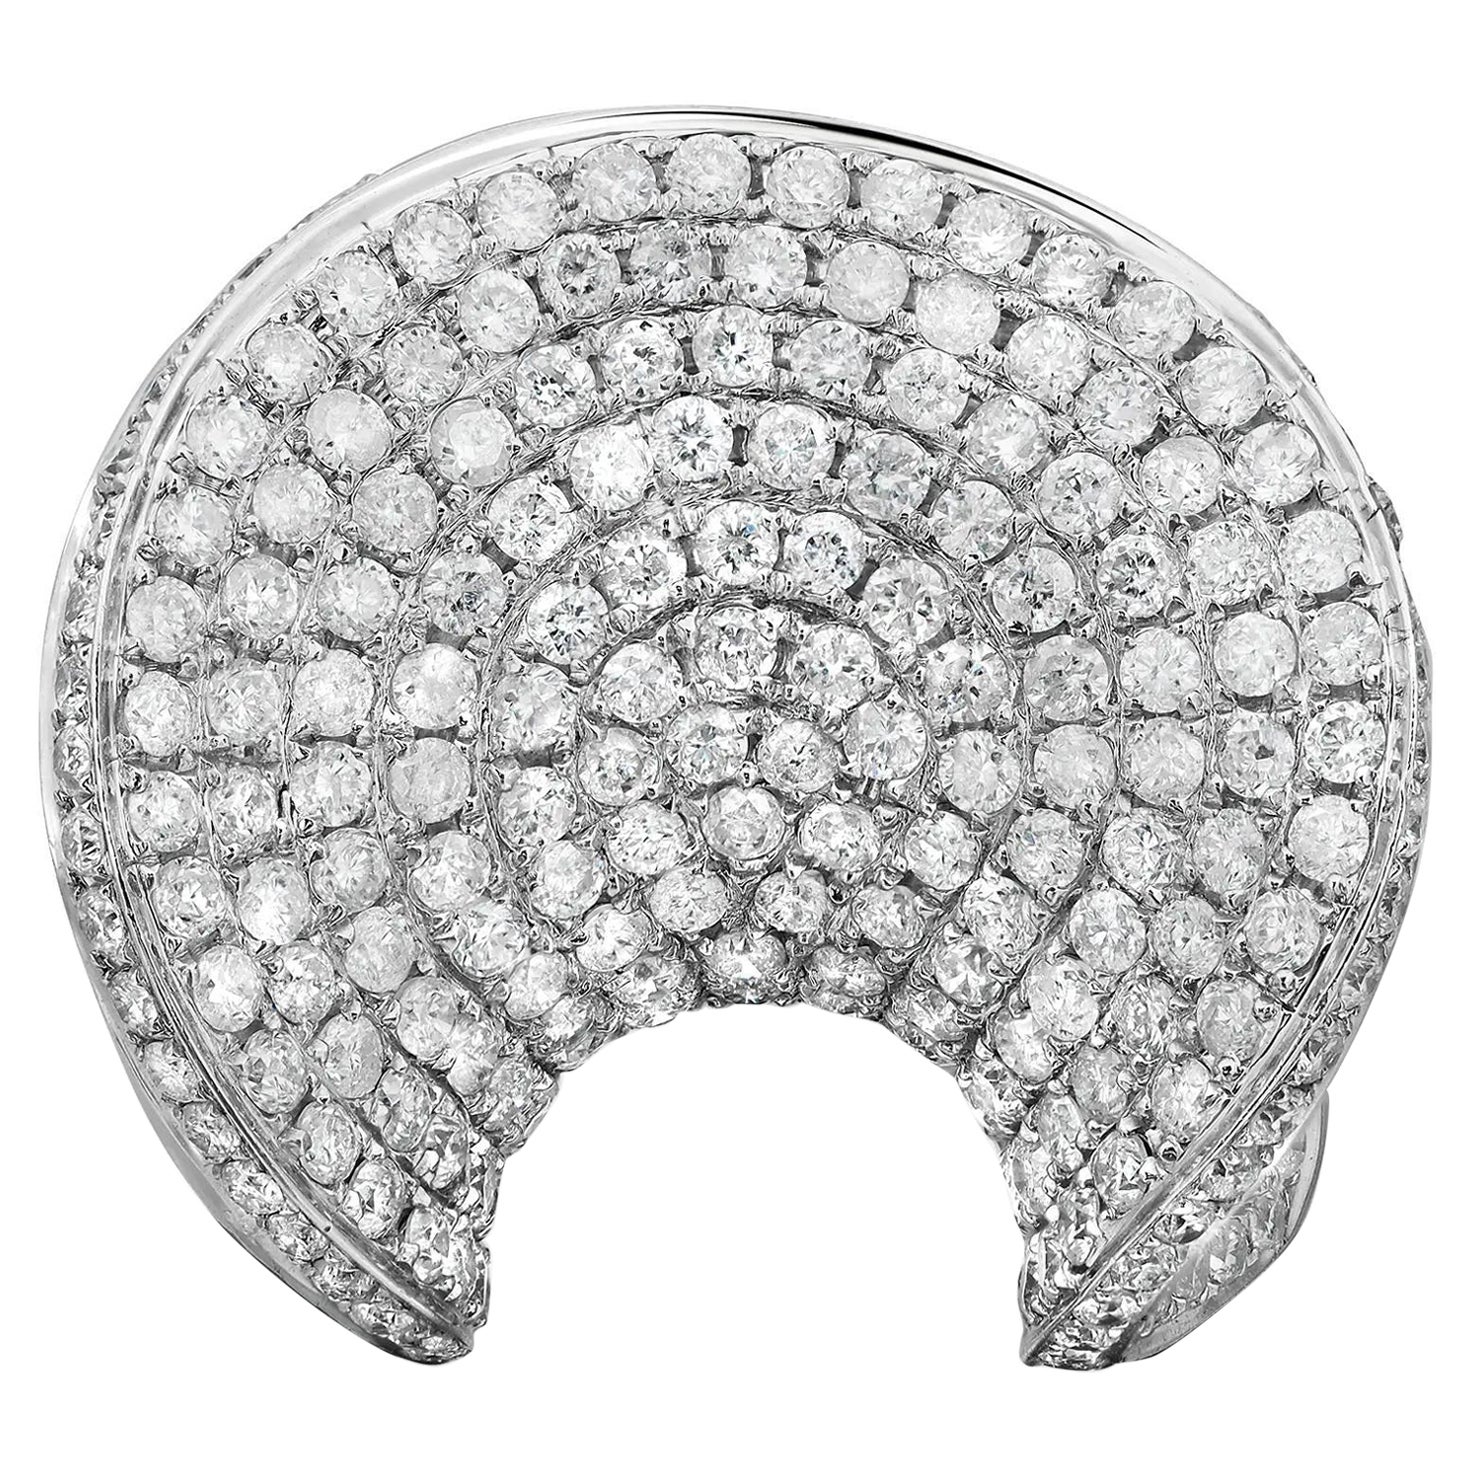 2.32Cttw Pave Set Round Cut Diamond Ladies Cocktail Ring 14K White Gold Size 7.5 For Sale